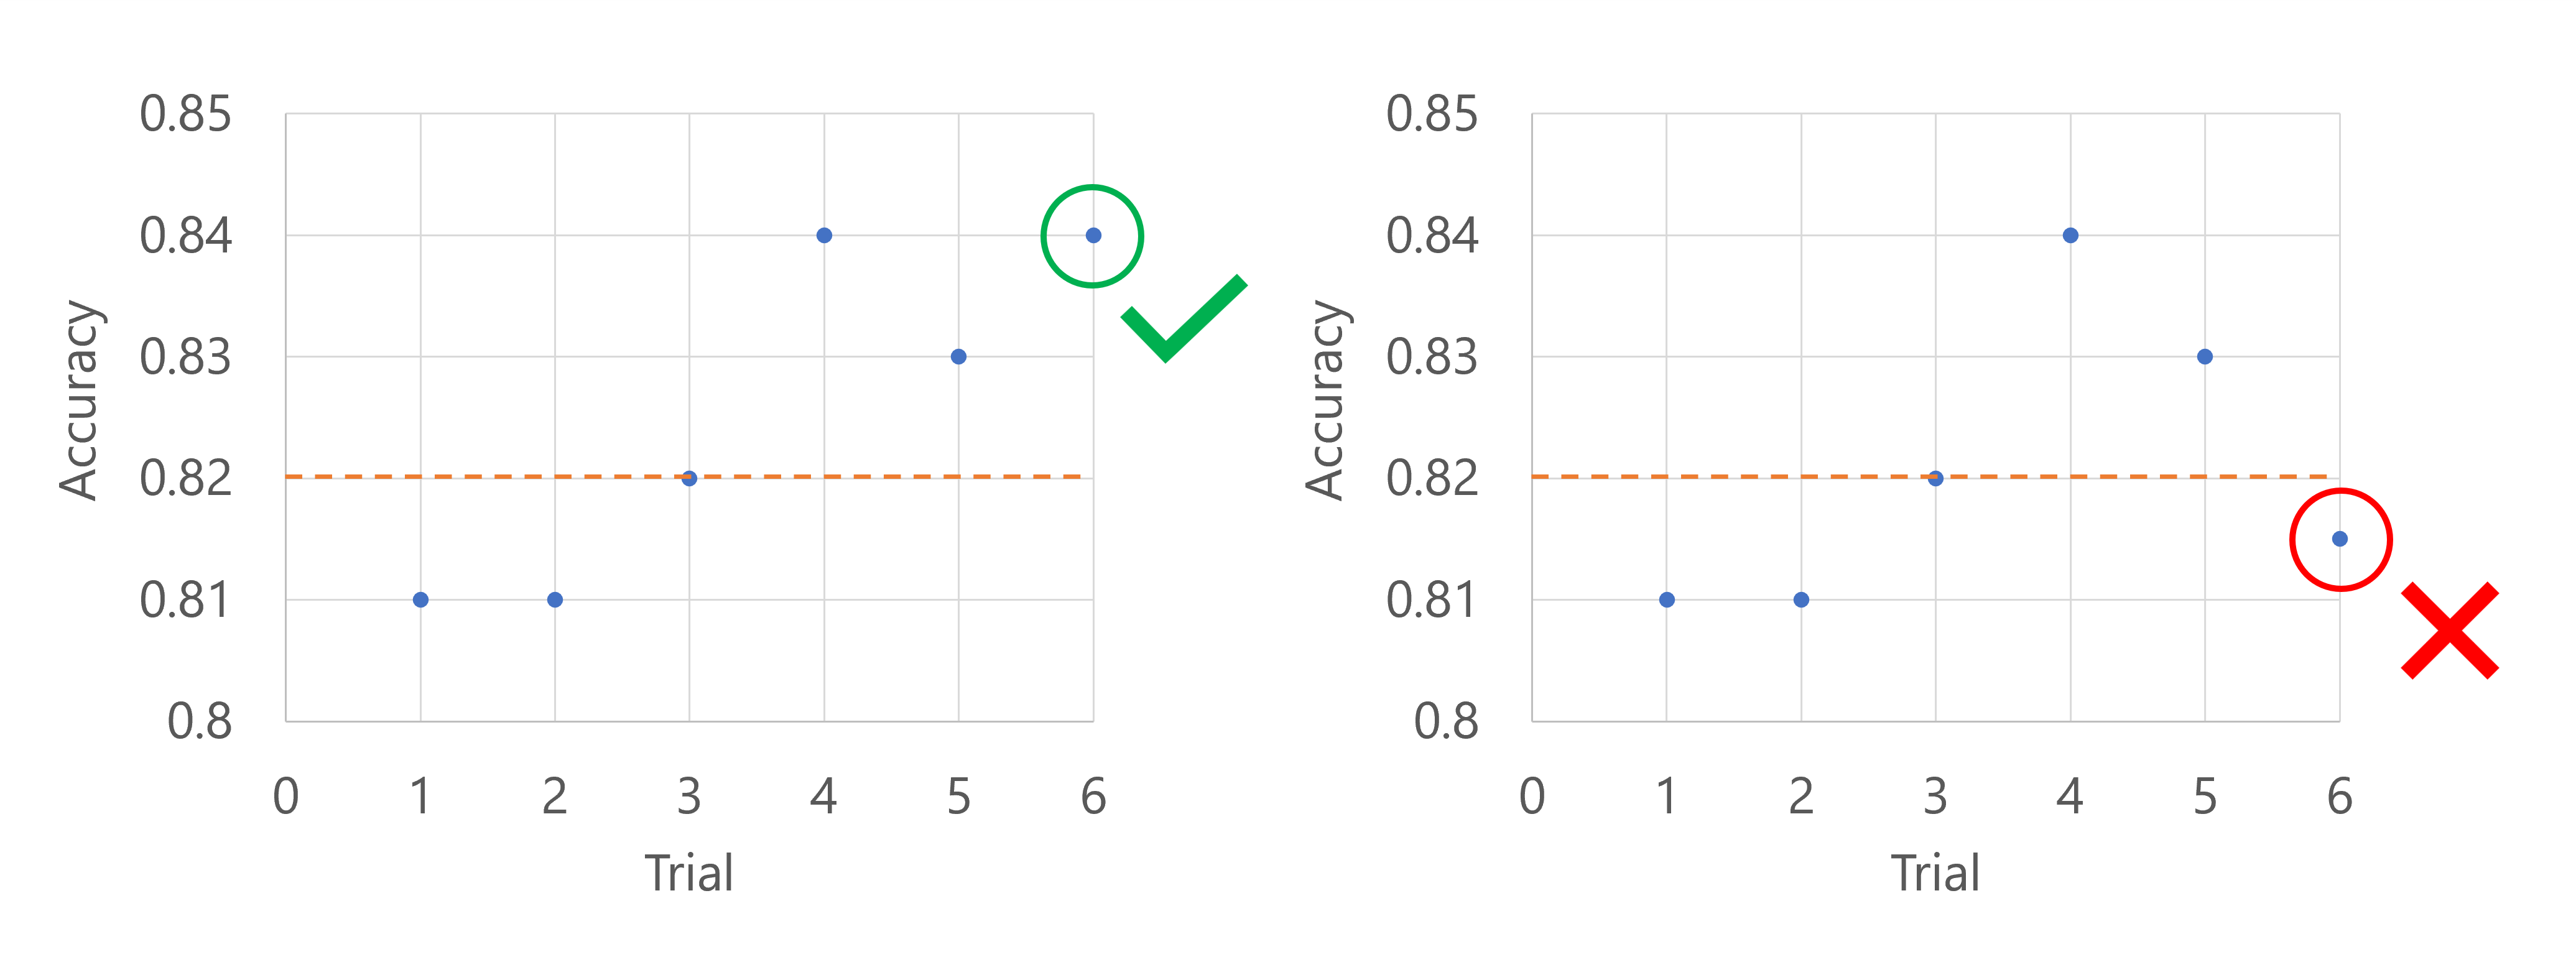 Diagram of two examples when using a median stopping policy: one model performs sufficiently good, the other underperforms.